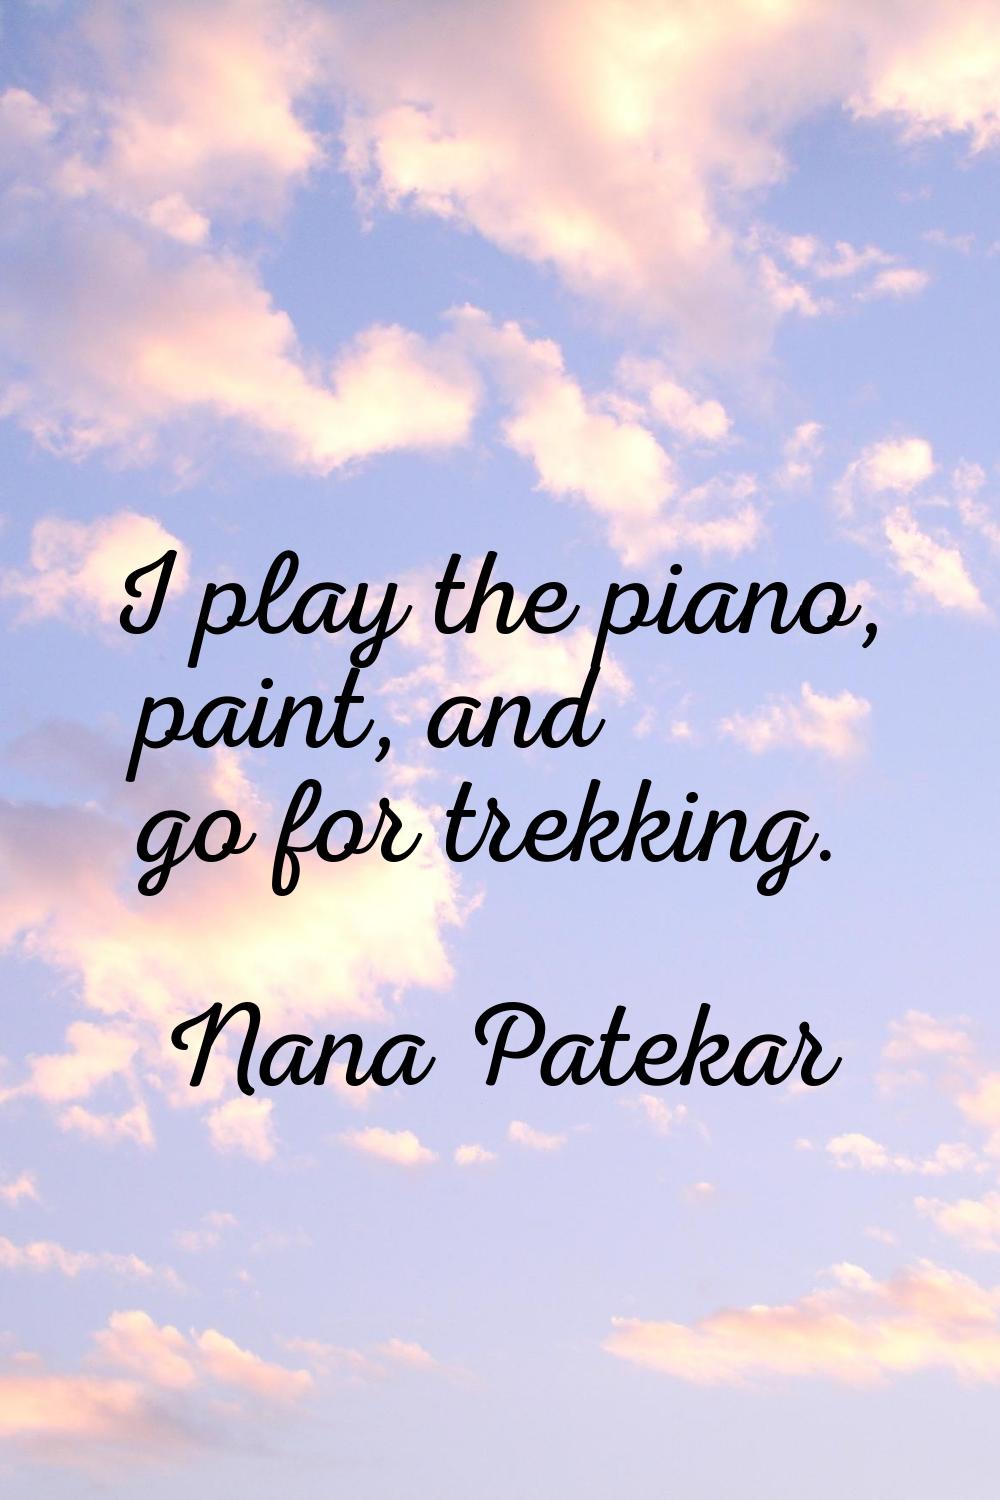 I play the piano, paint, and go for trekking.